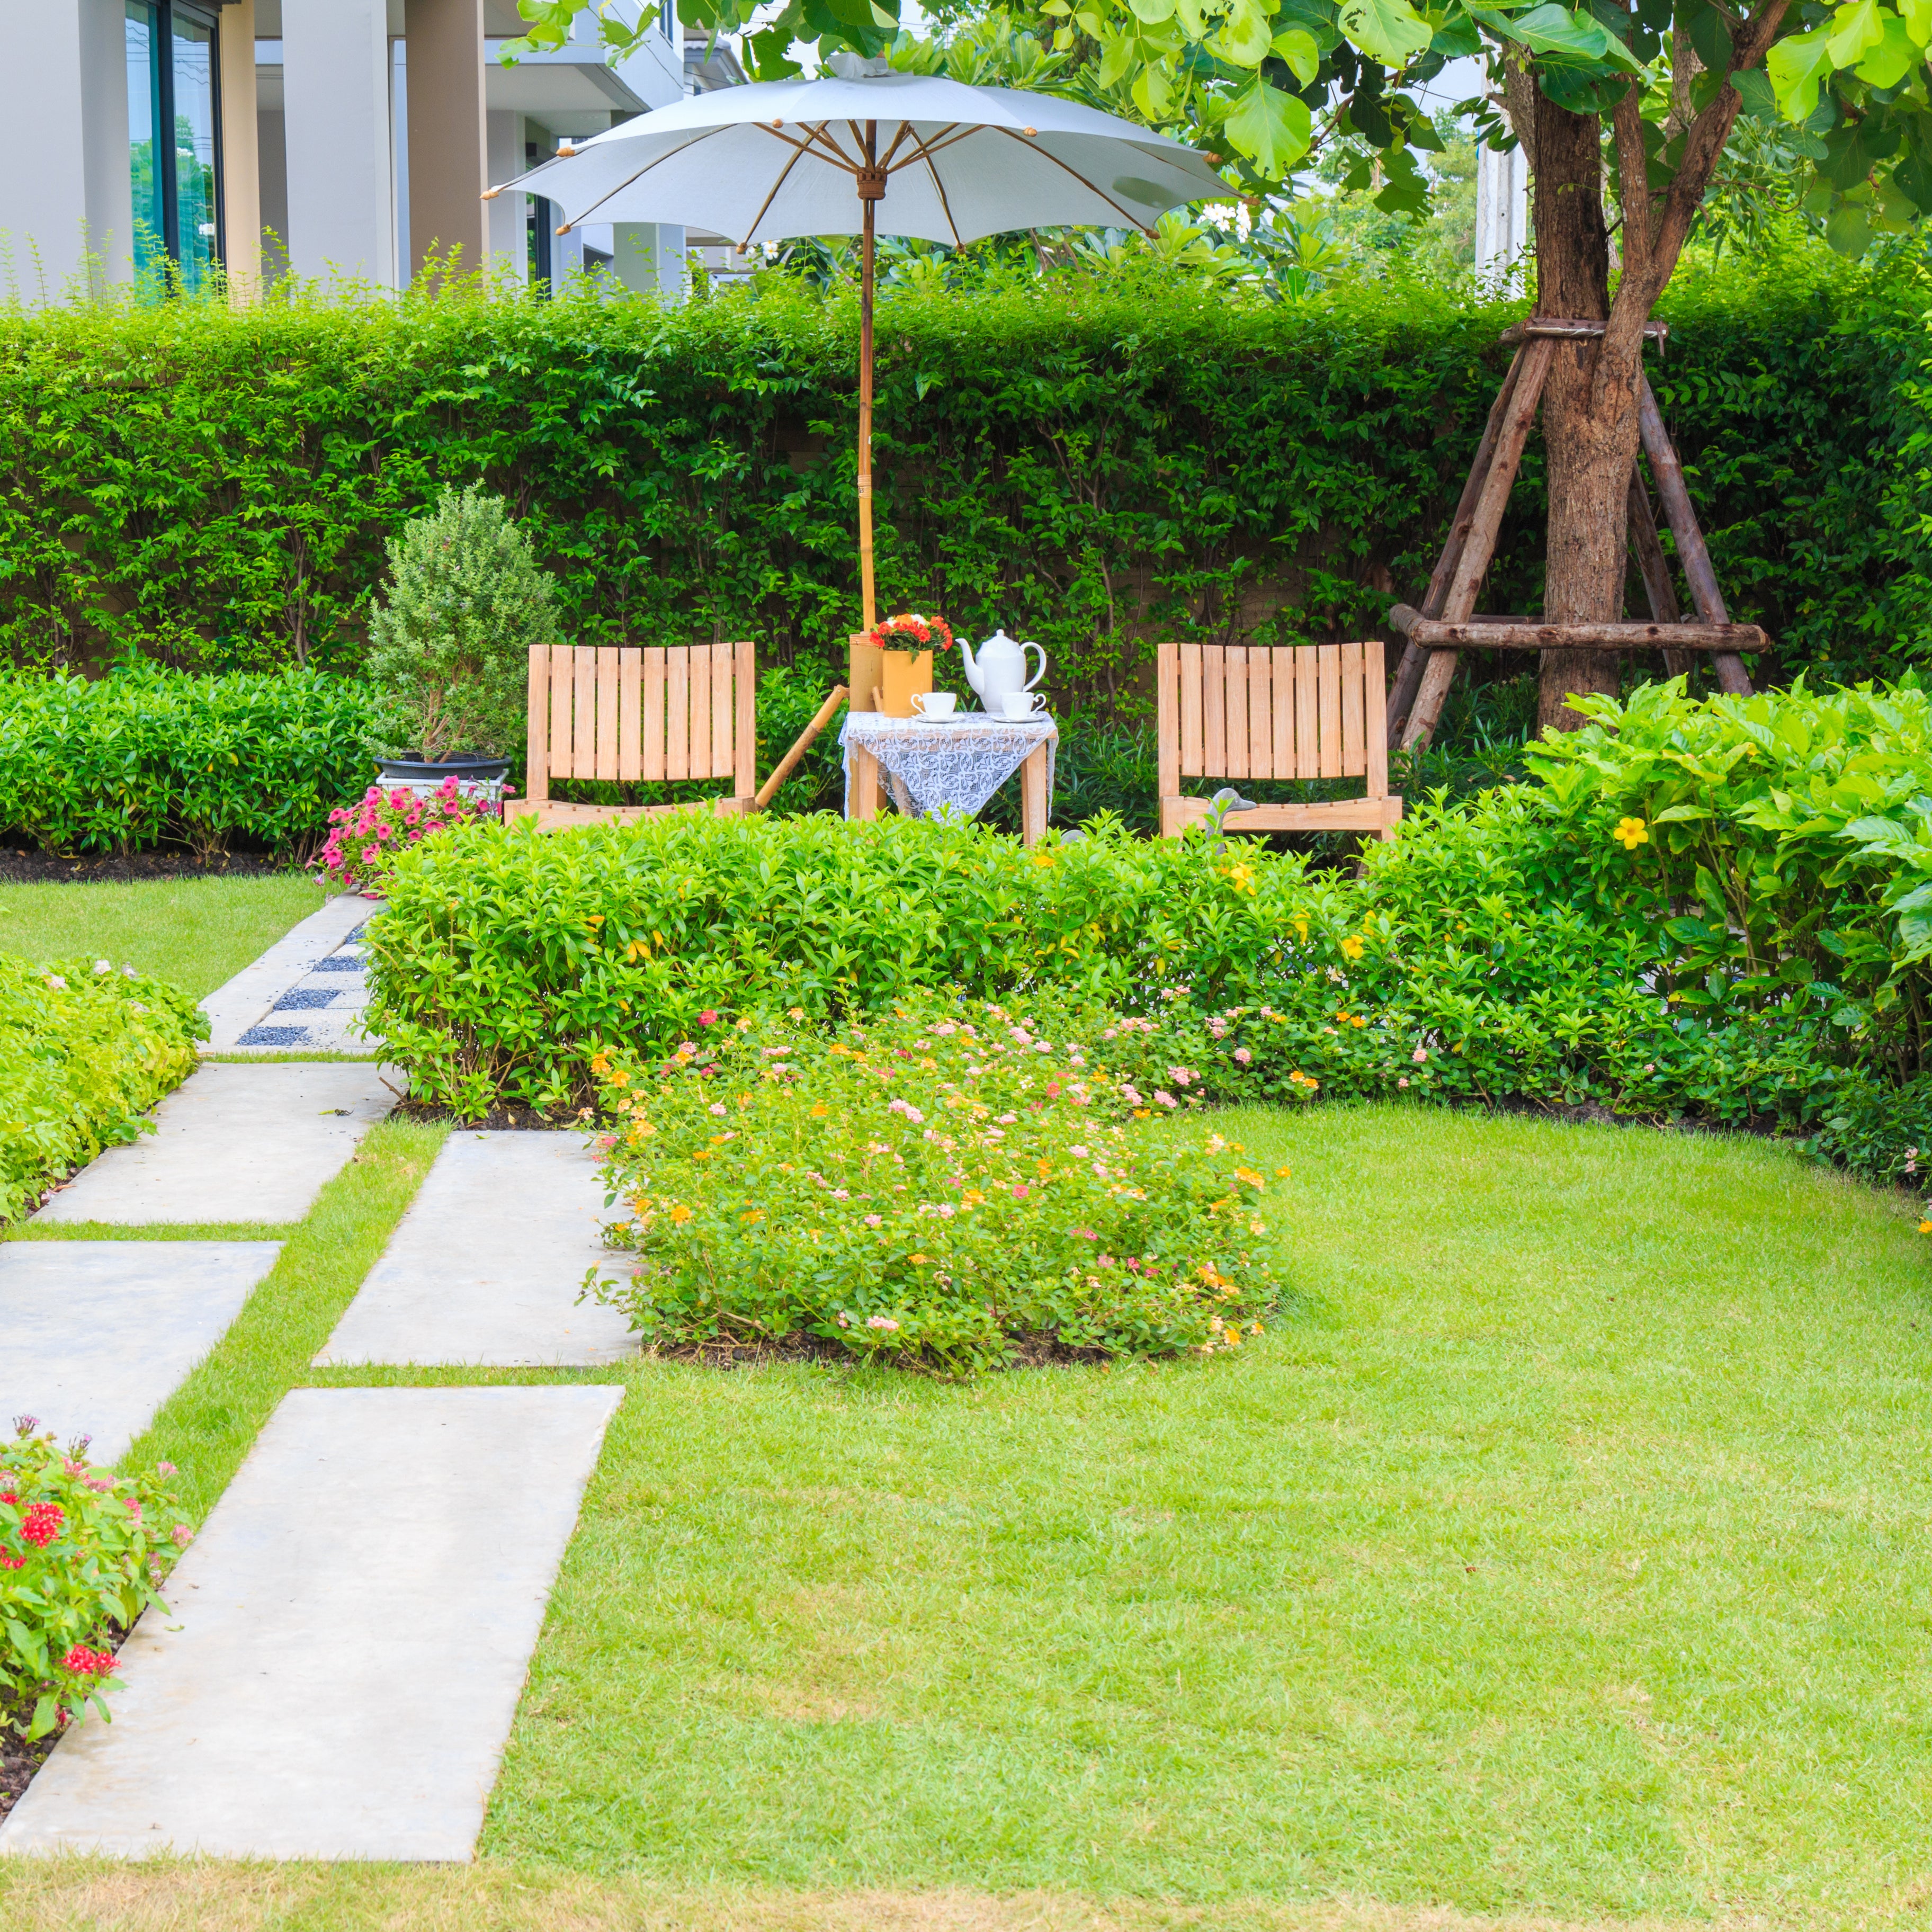 5 Ways to Love Your Lawn